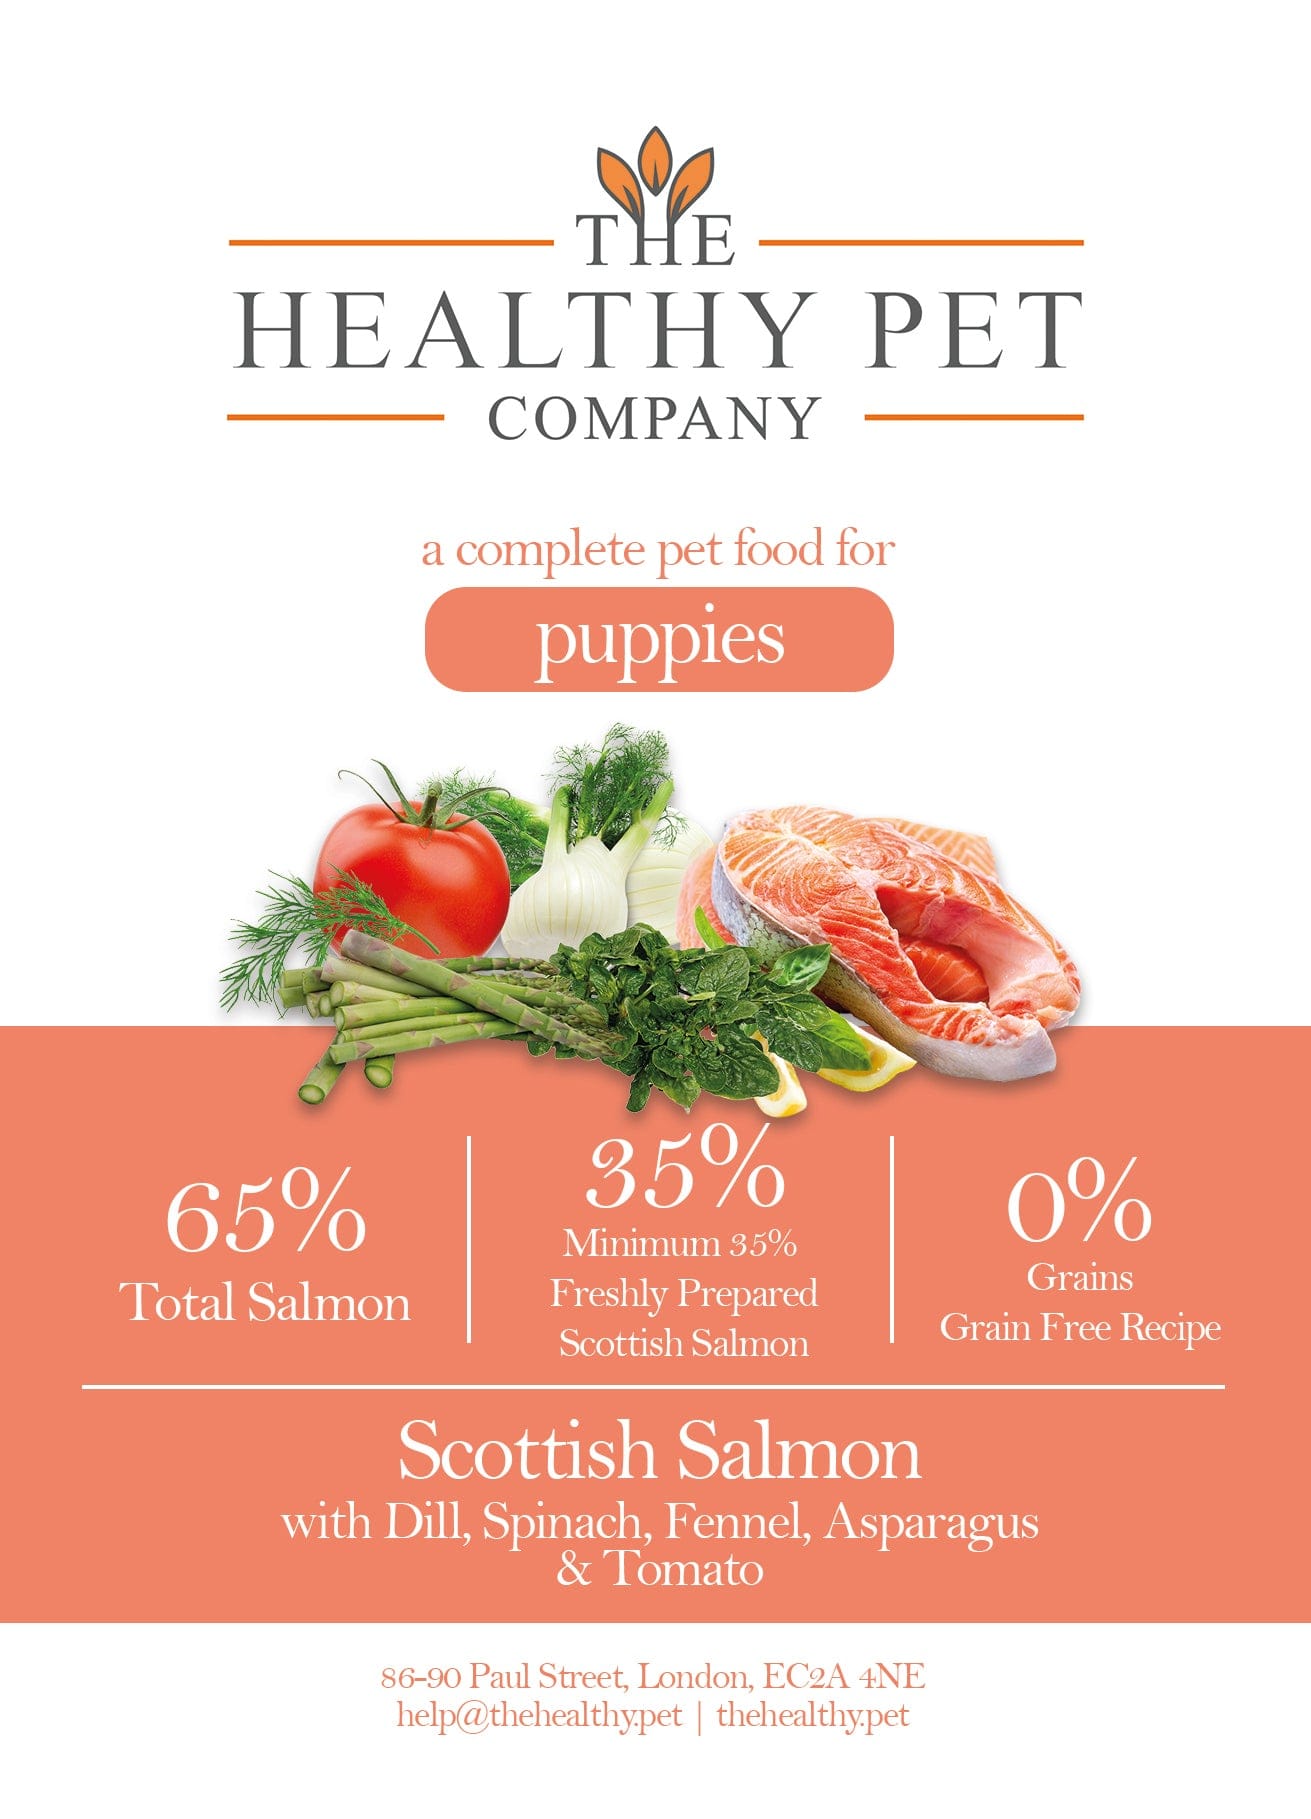 The Healthy Pet Company Complete Meal - Scottish Salmon & Veg for Puppies - The Healthy Pet Company